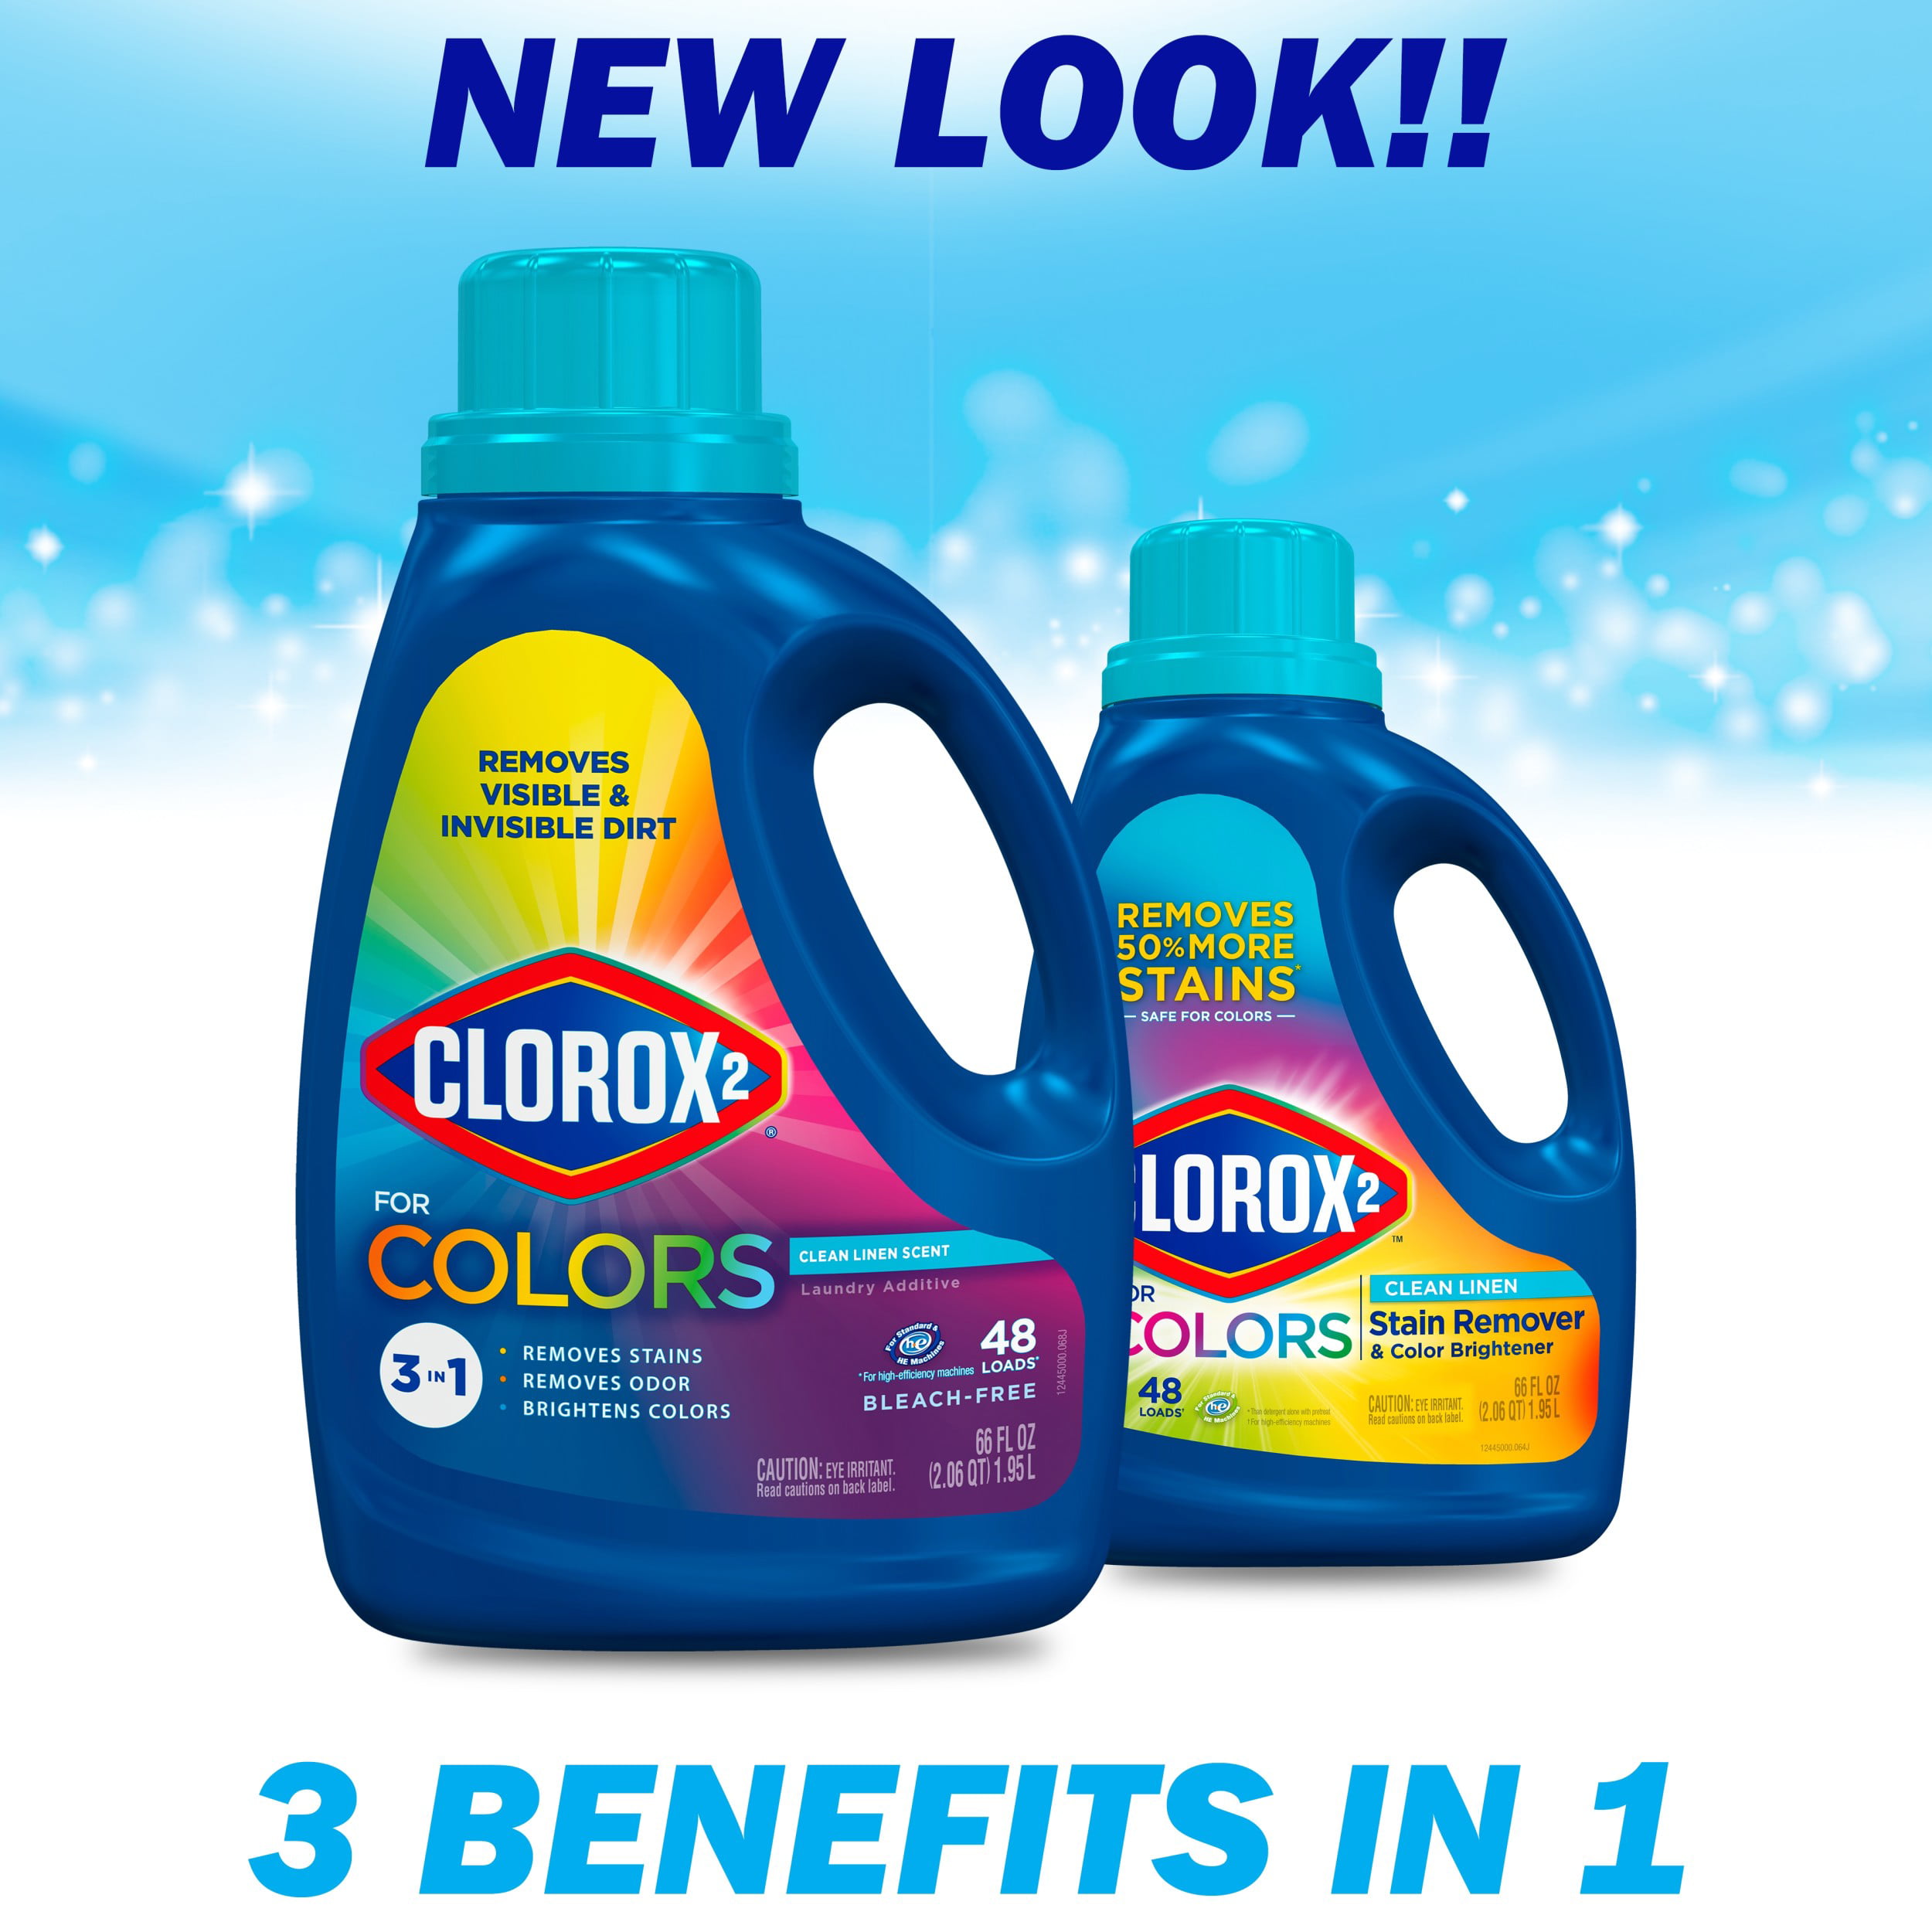 Clorox 2® Stain Remover And Color Booster, Unscented, 33 Oz